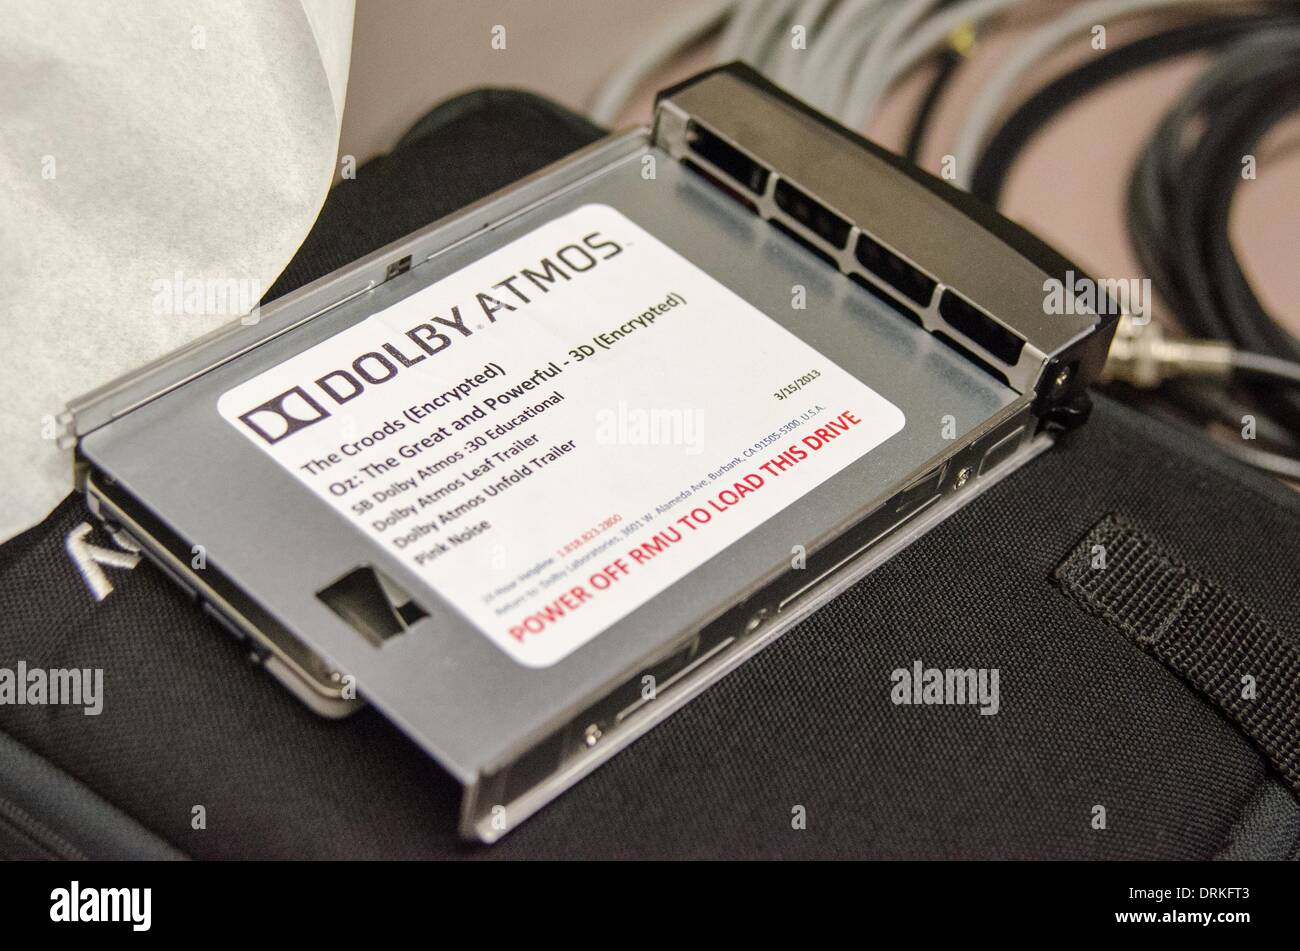 At company headquarters in San Francisco, a hard drive with Dolby Atmos movie clips has been put aside by engineers working on the new surround sound technology. - 2013. Stock Photo